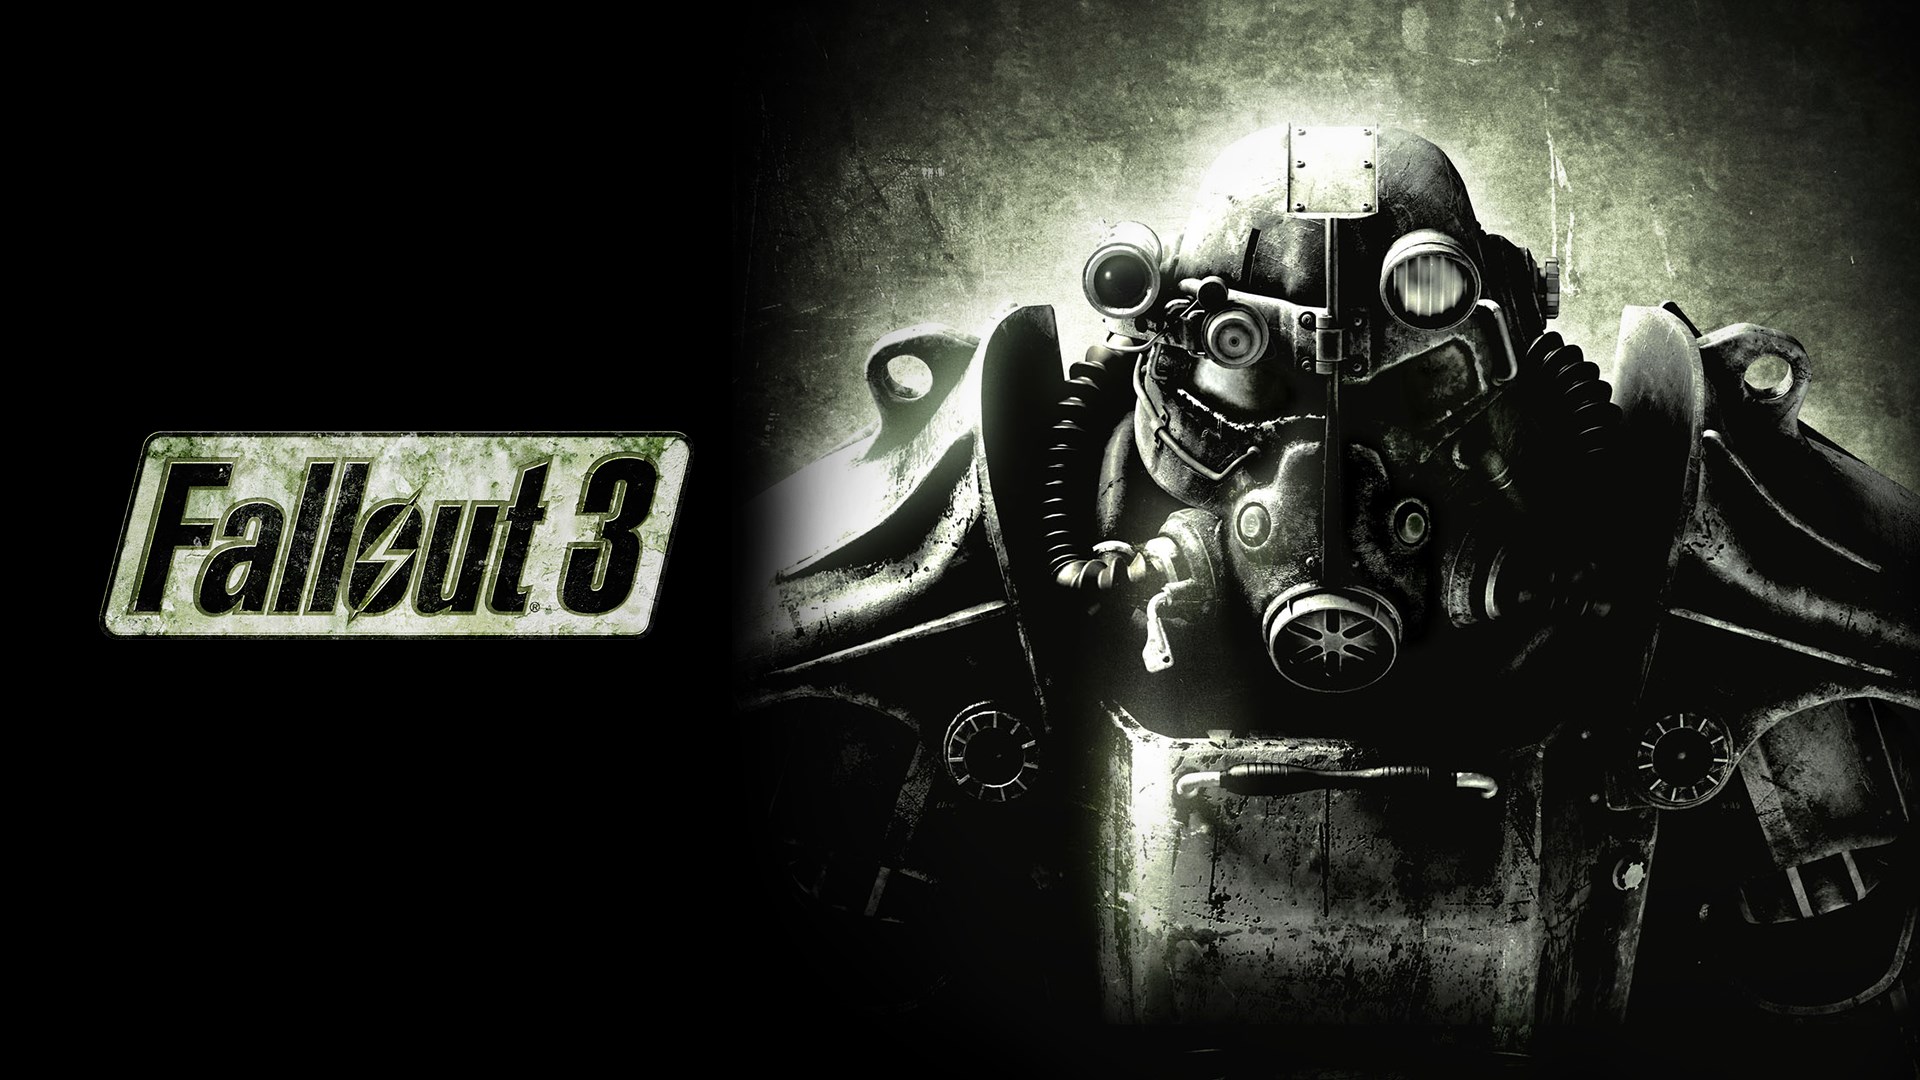 Buy Fallout 3: Game of the Year Edition - Microsoft Store en-SA